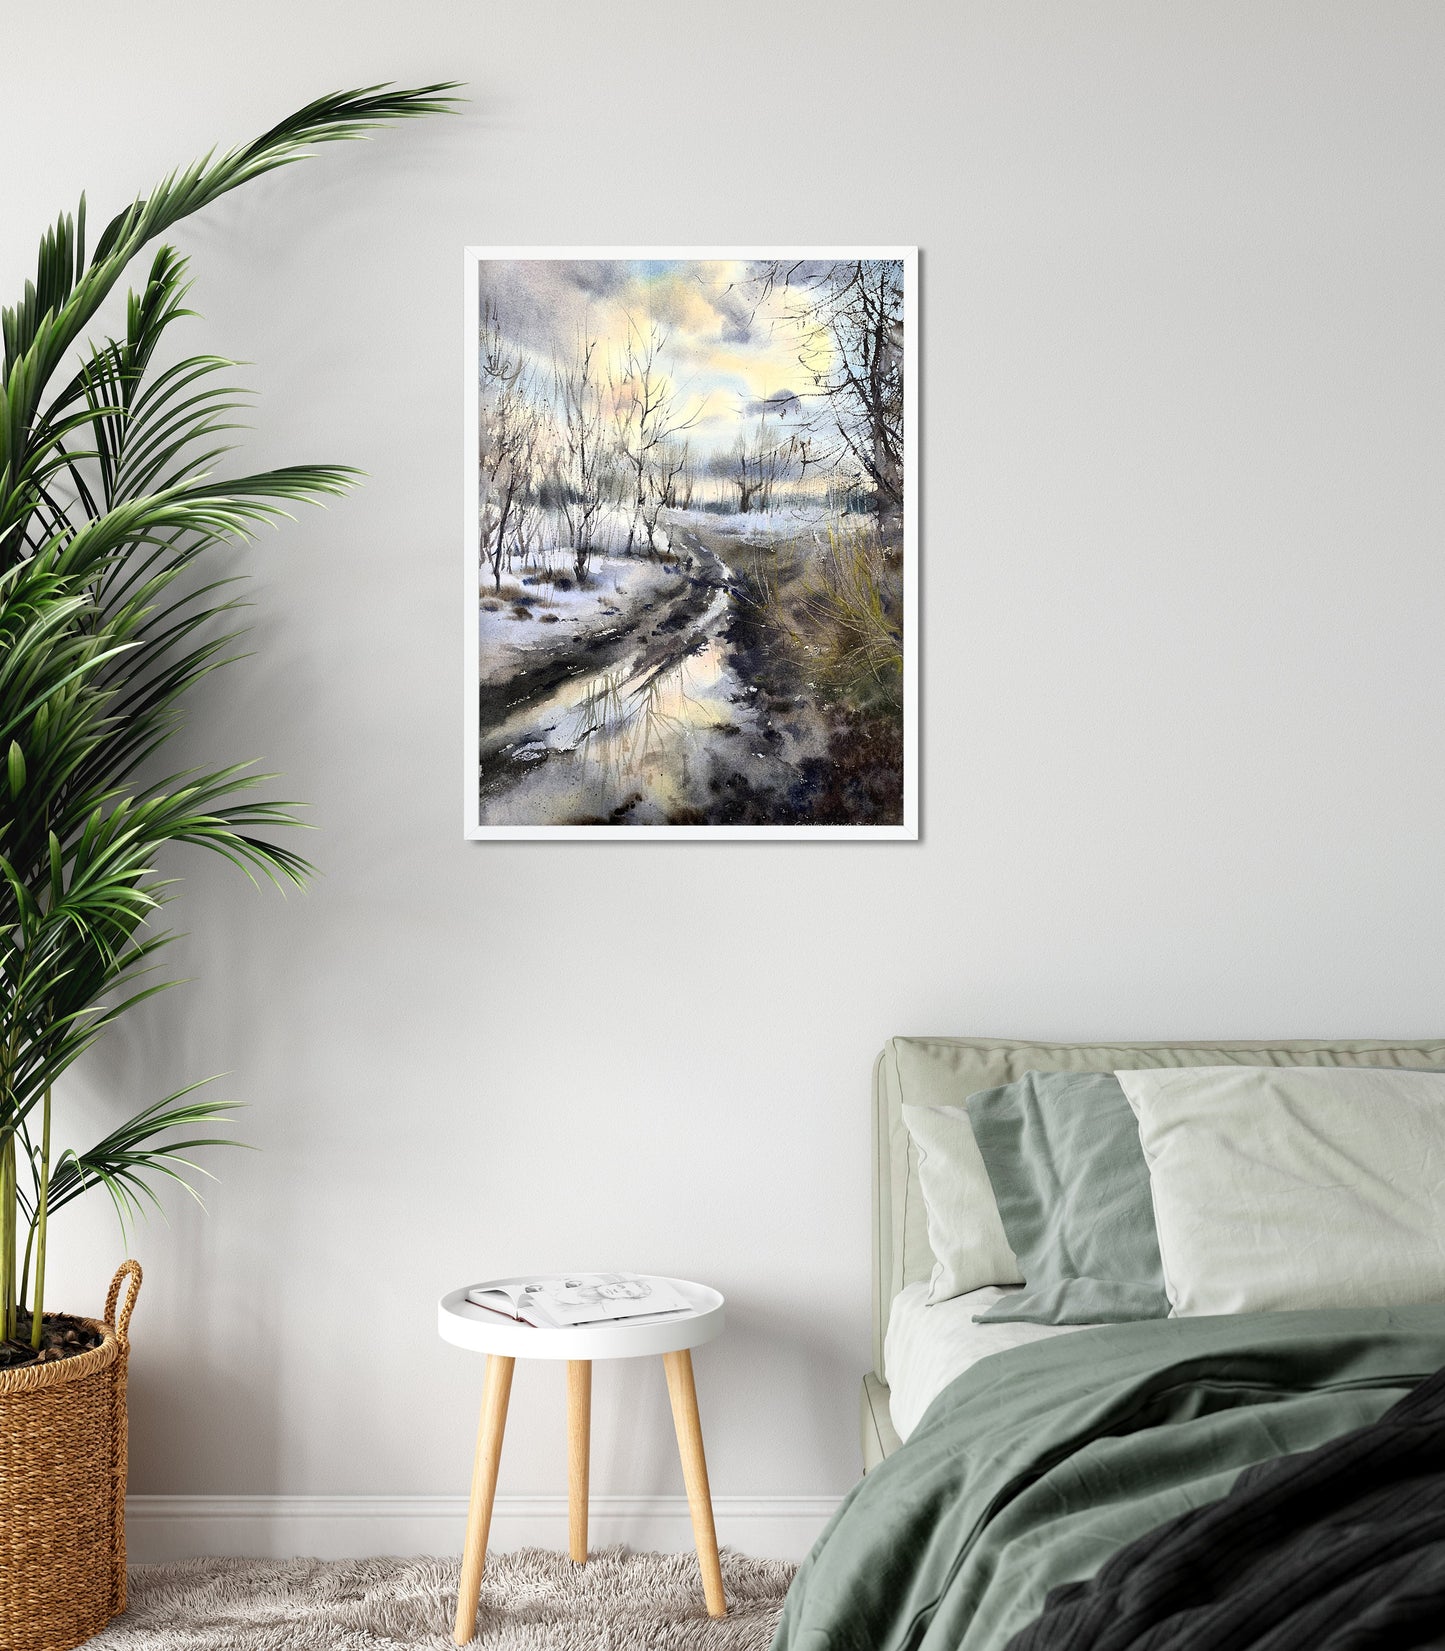 Winter Landscape Art Print, Watercolor Scenery Painting Farmhouse & Country House Wall Decor, Canvas Prints, Trees, Gift